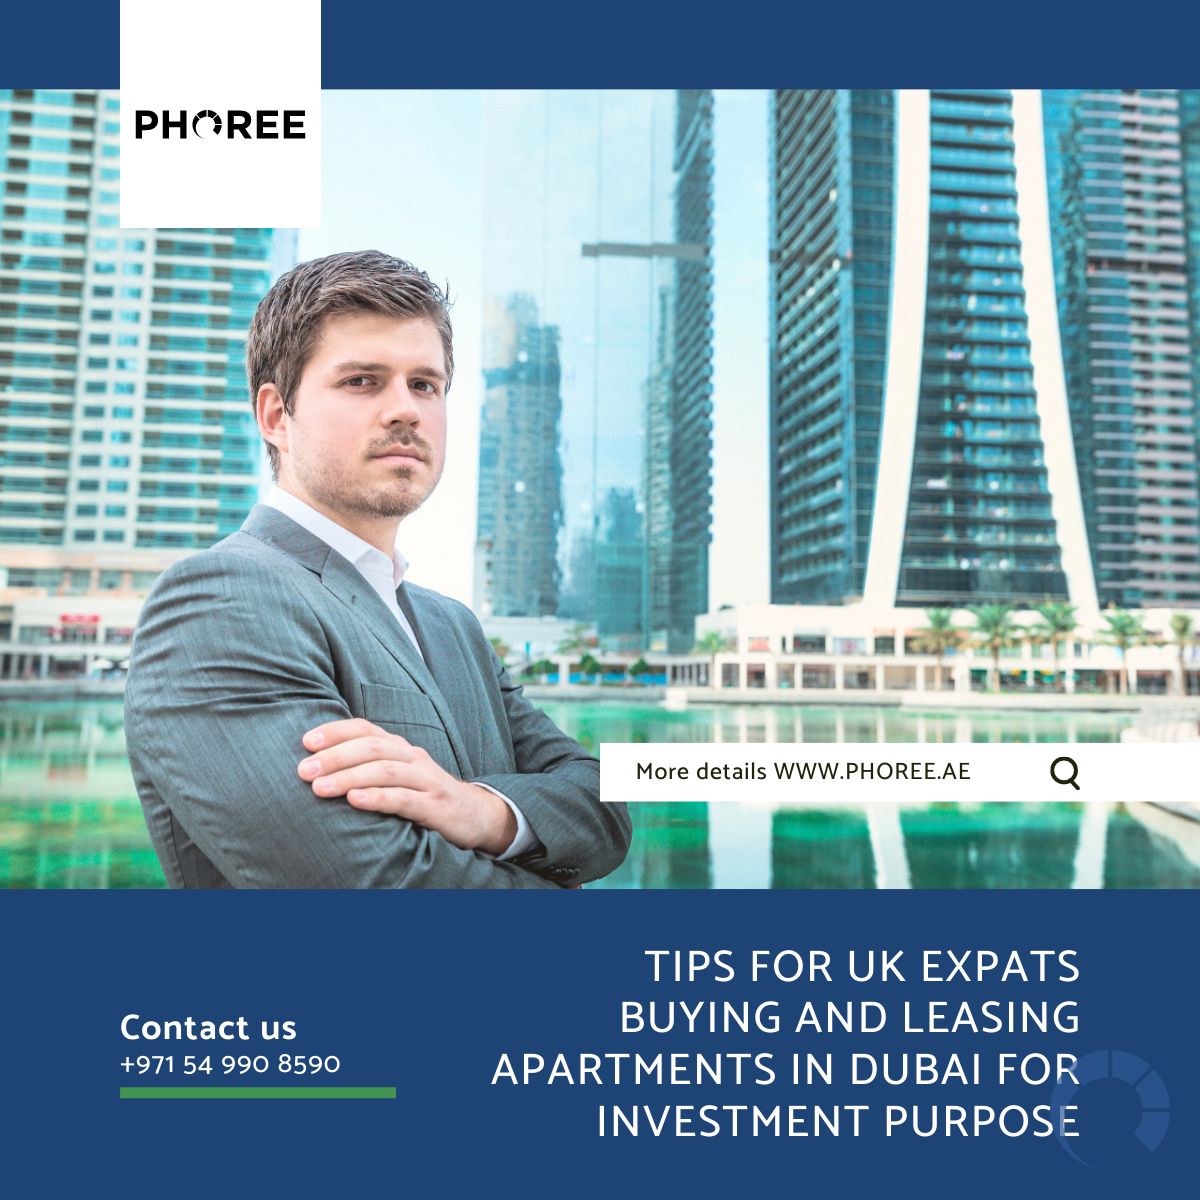 TIPS FOR UK EXPATS BUYING AND LEASING APARTMENTS IN DUBAI FOR INVESTMENT PURPOSE